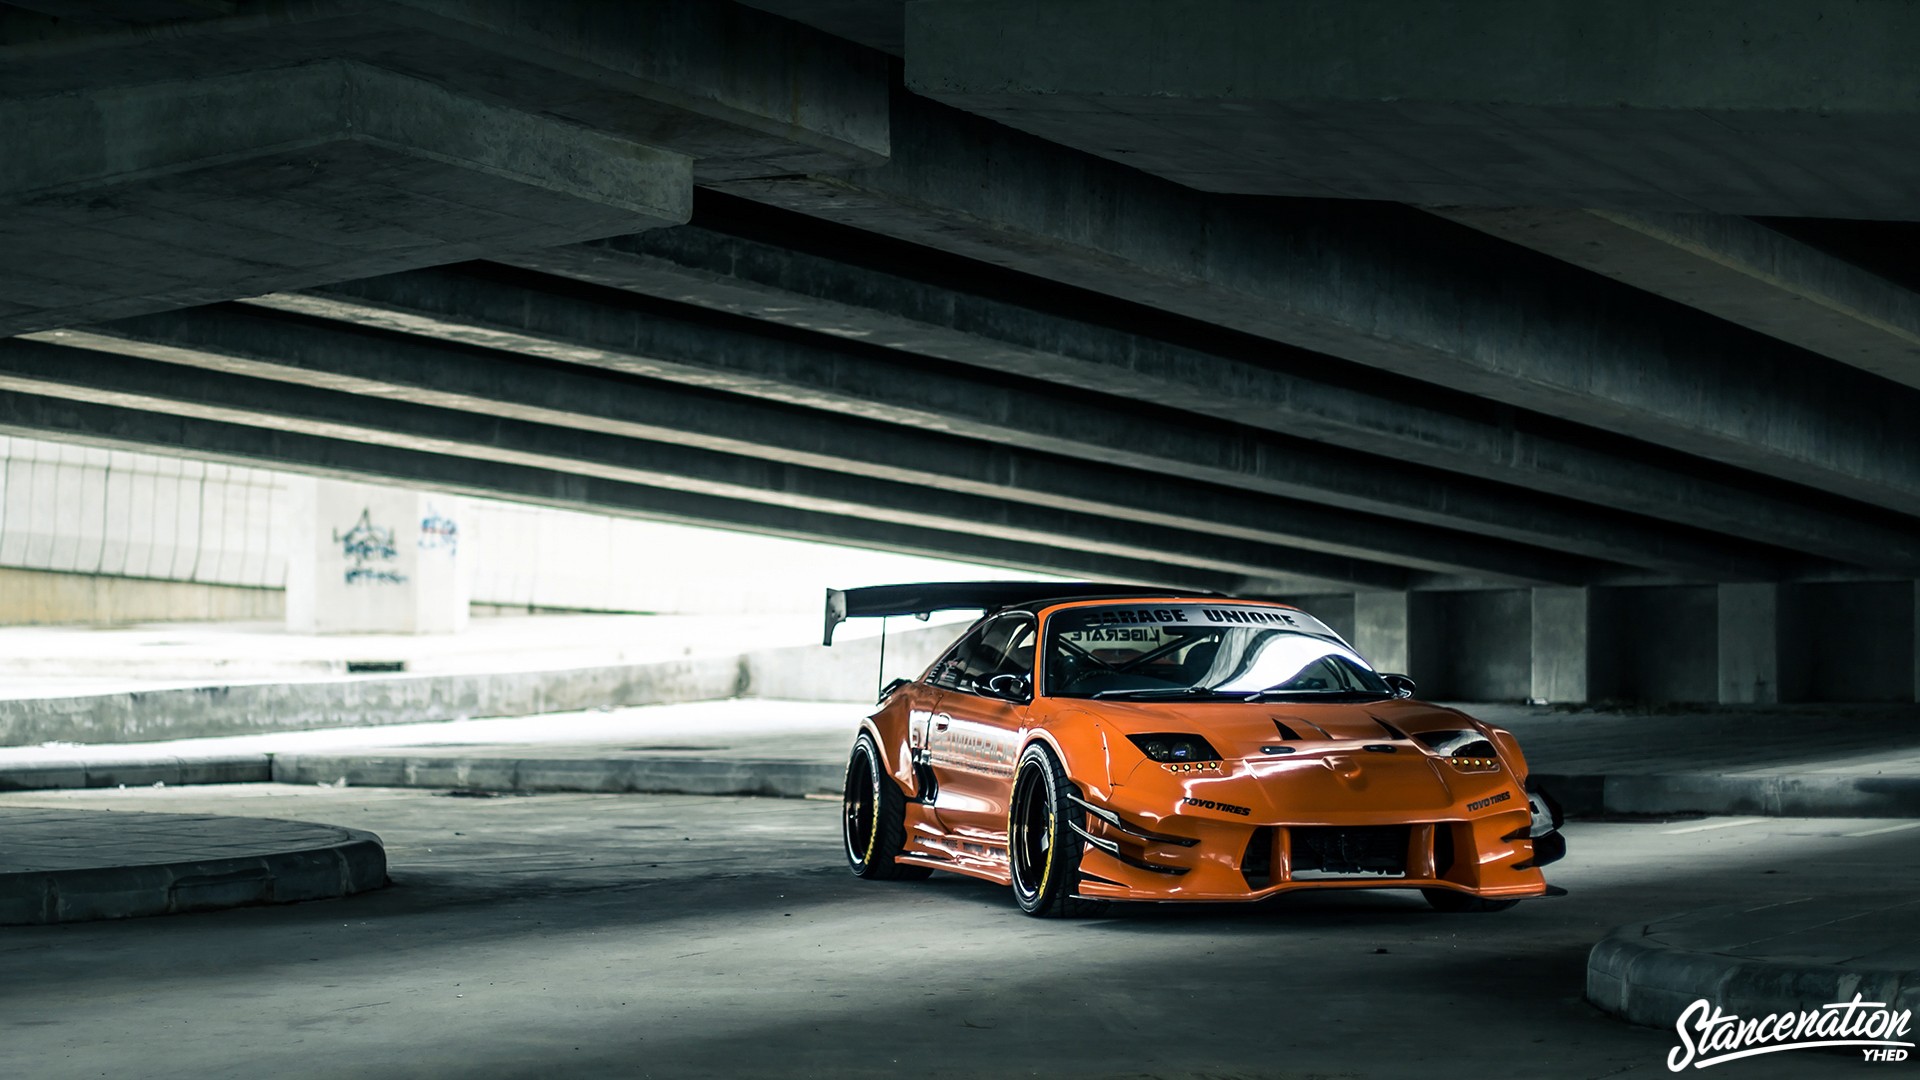 General 1920x1080 StanceNation car vehicle stance (cars) Toyota Toyota MR2 watermarked orange cars Japanese cars sunlight frontal view